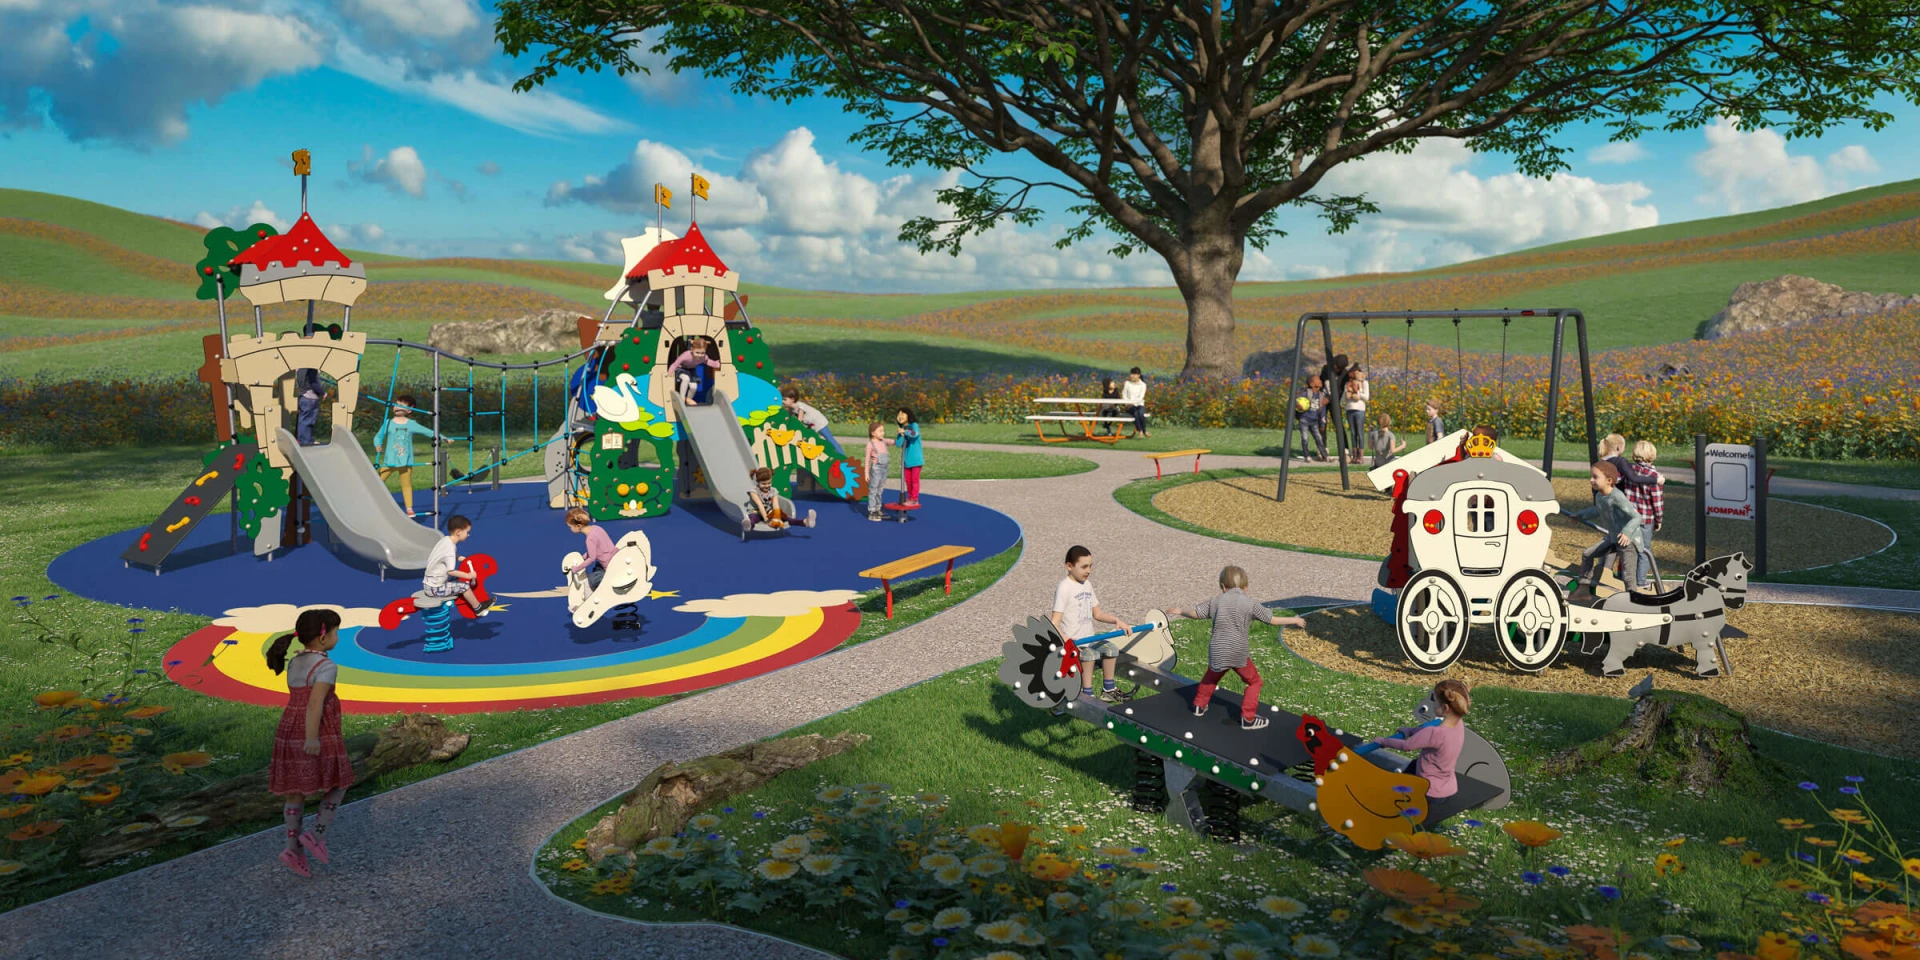 Design idea for a playground with a fairy tale theme